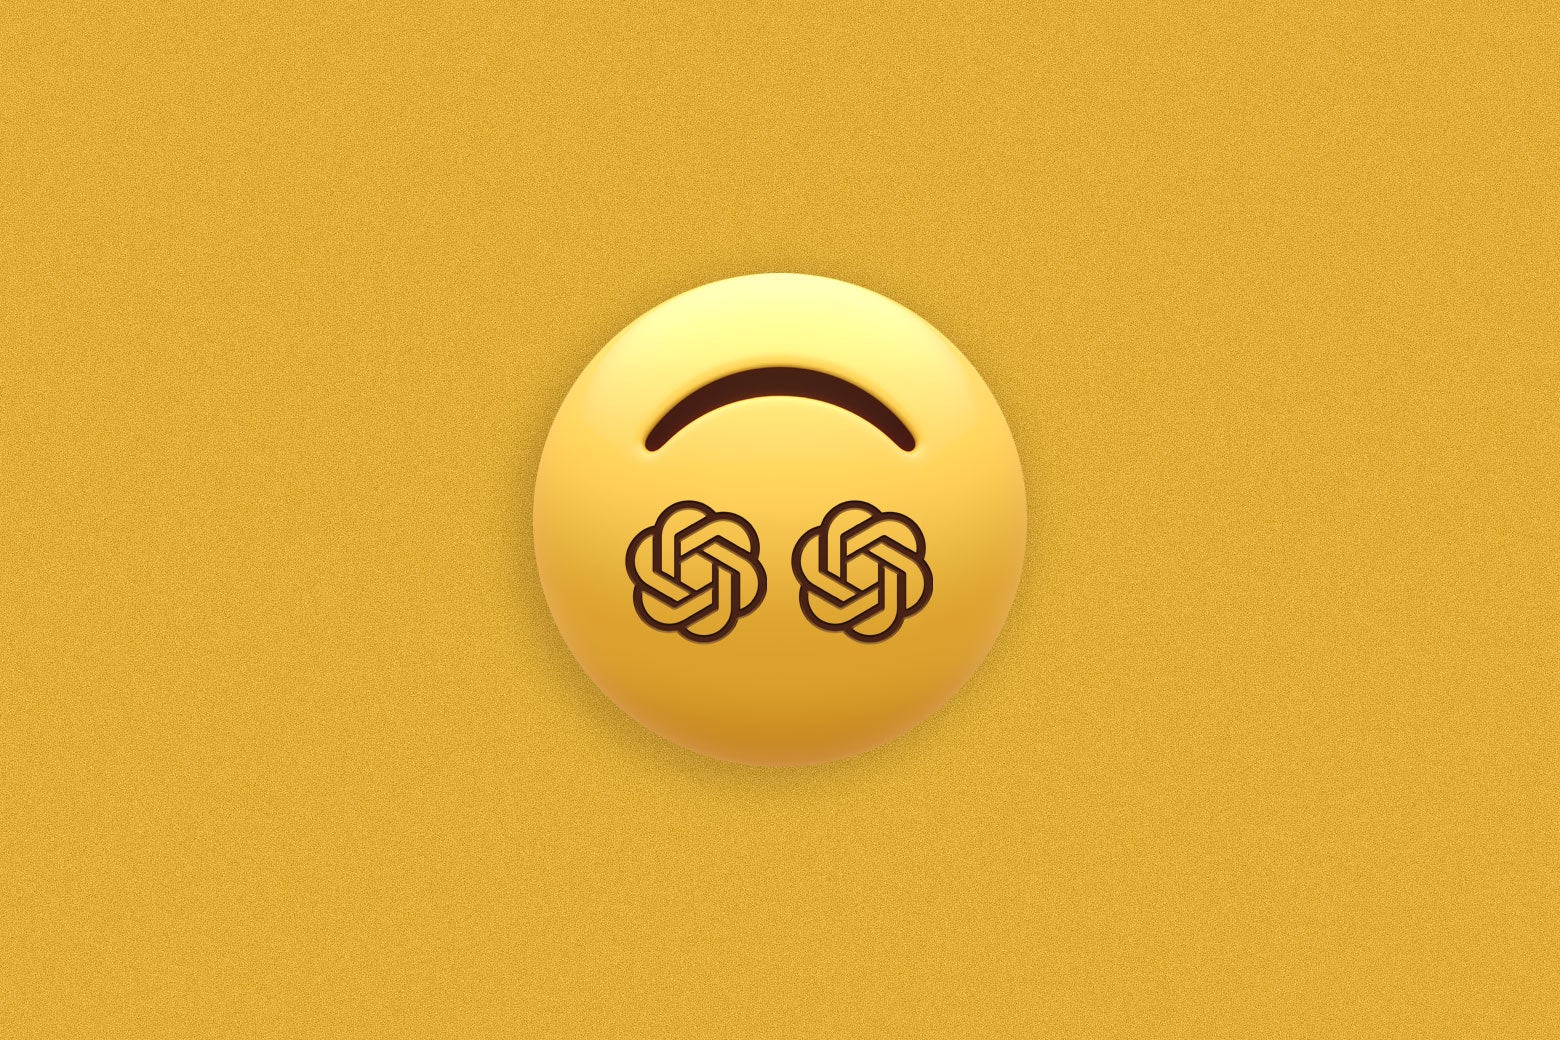 An upside-down smiley-face emoji with OpenAI logos for eyes.